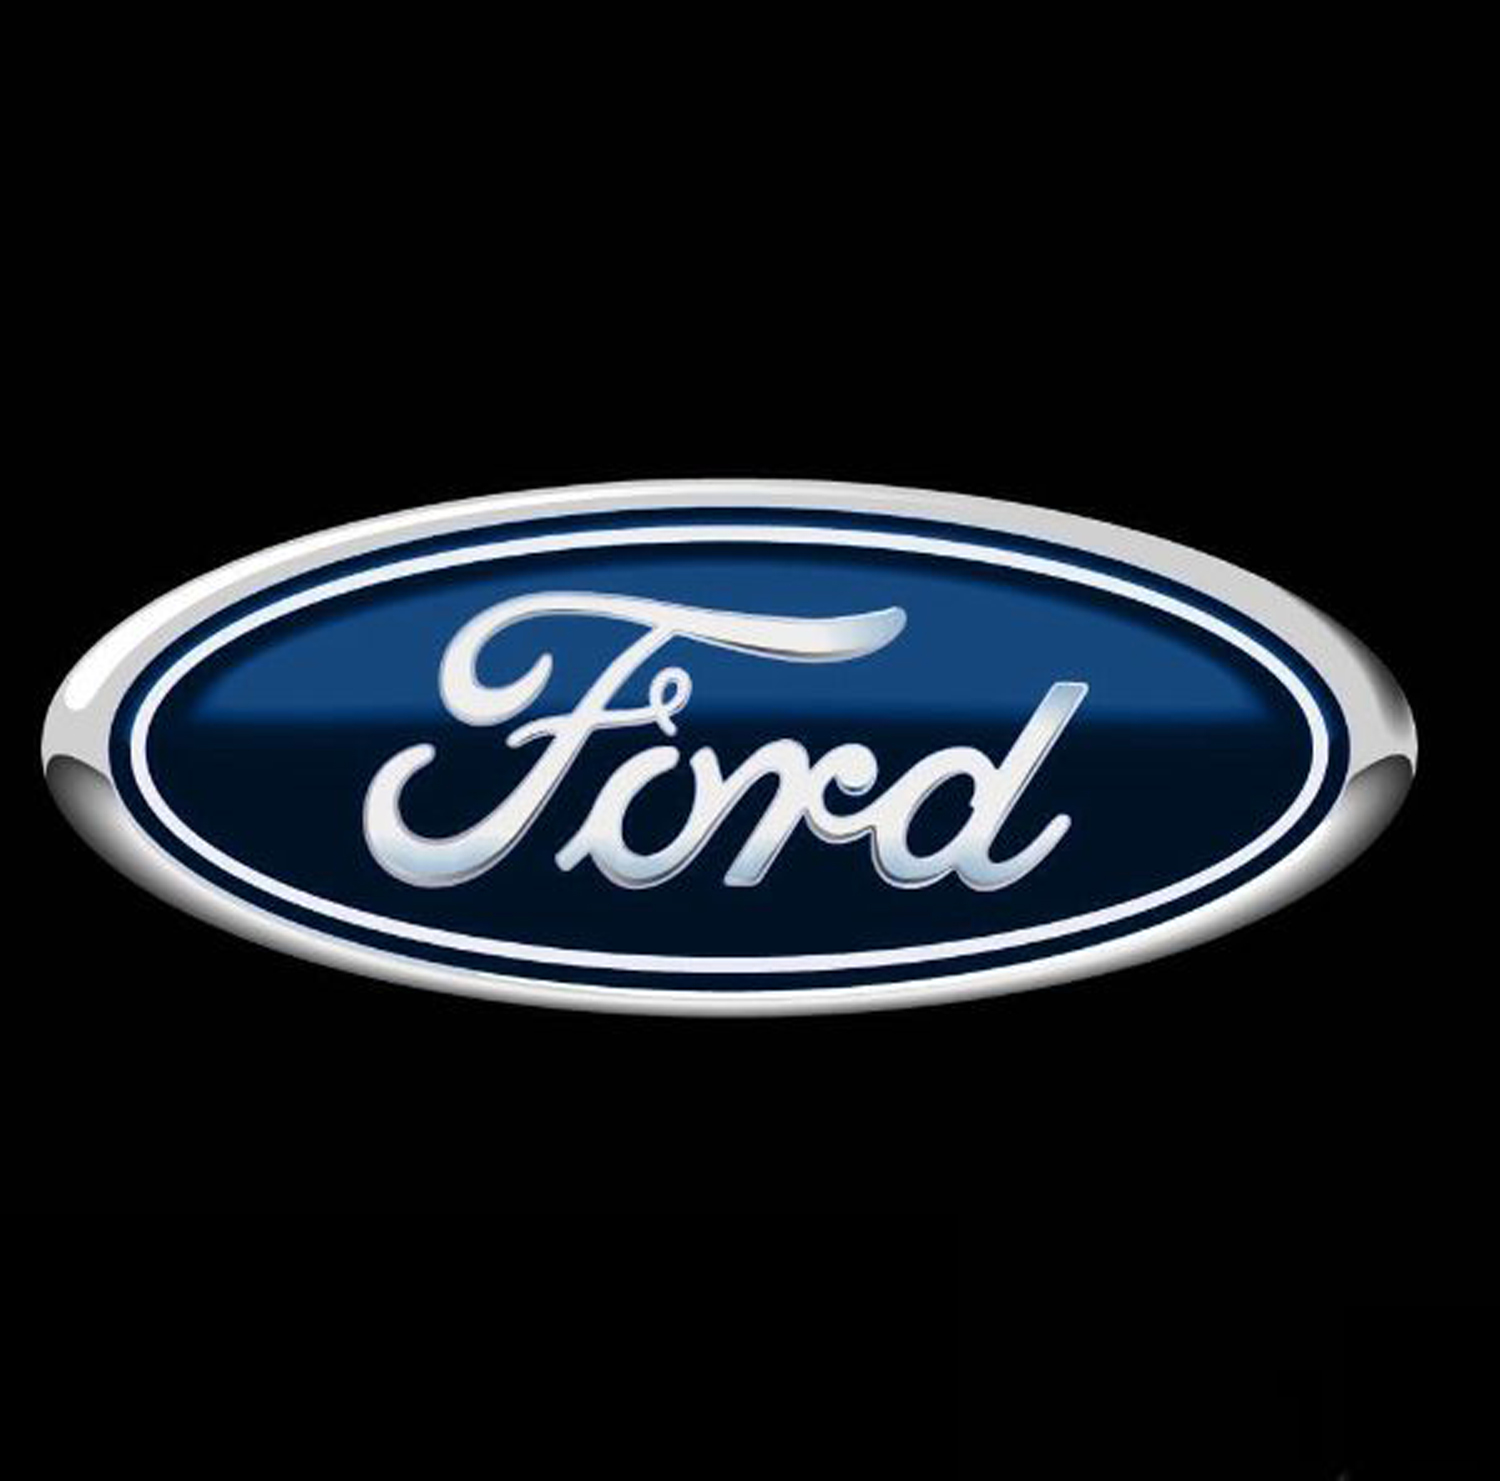 FORD LOGO AND STOCK